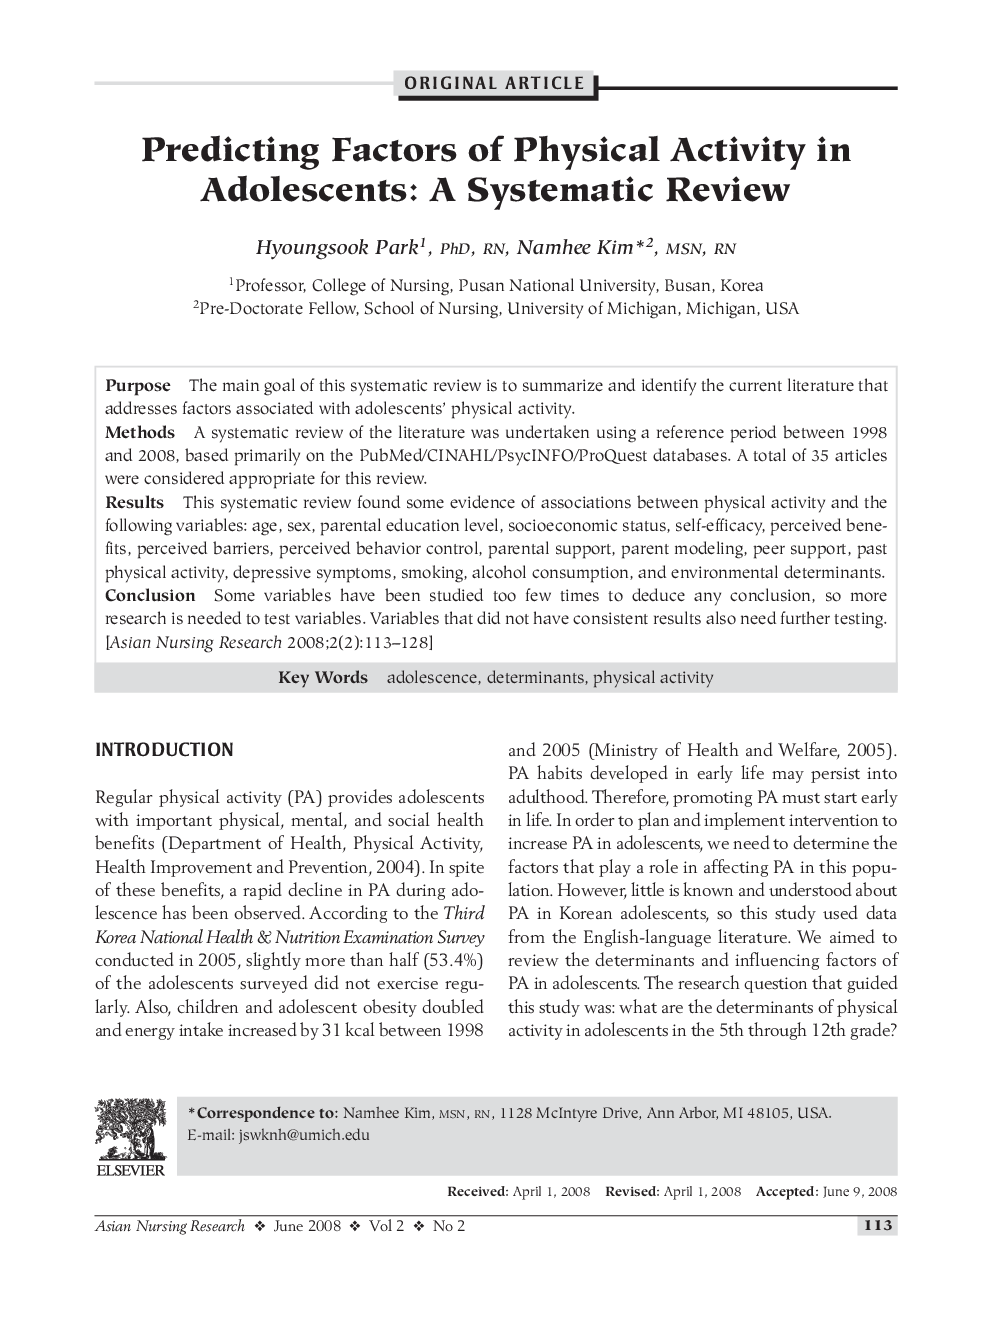 Predicting Factors of Physical Activity in Adolescents: A Systematic Review